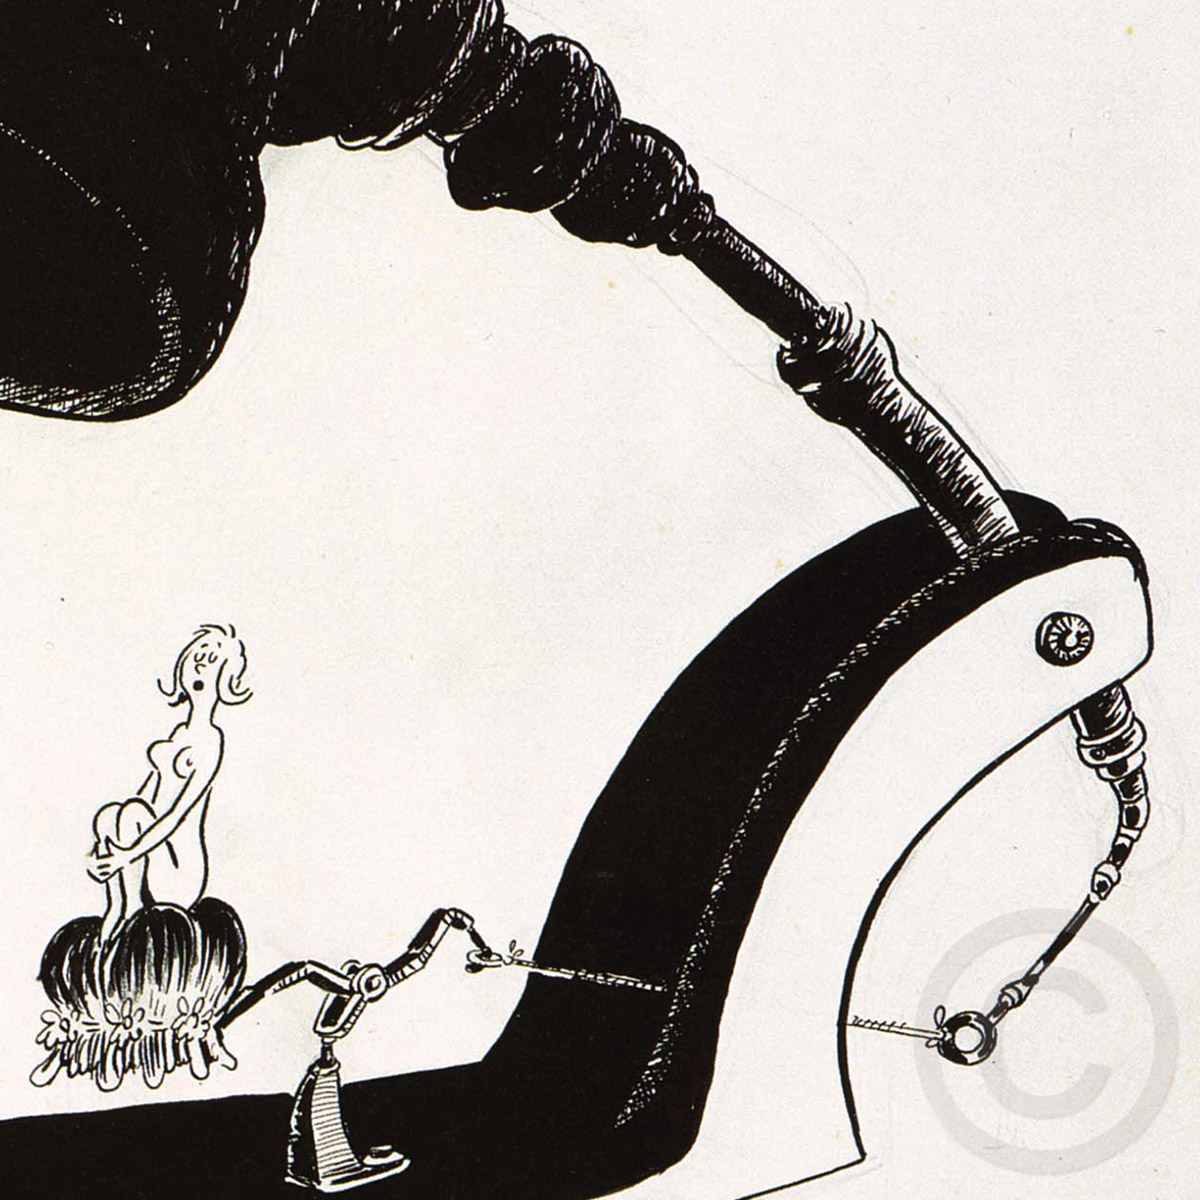 Booby Trap — The Art of Dr. Seuss Collection, Published by Chaseart Companies